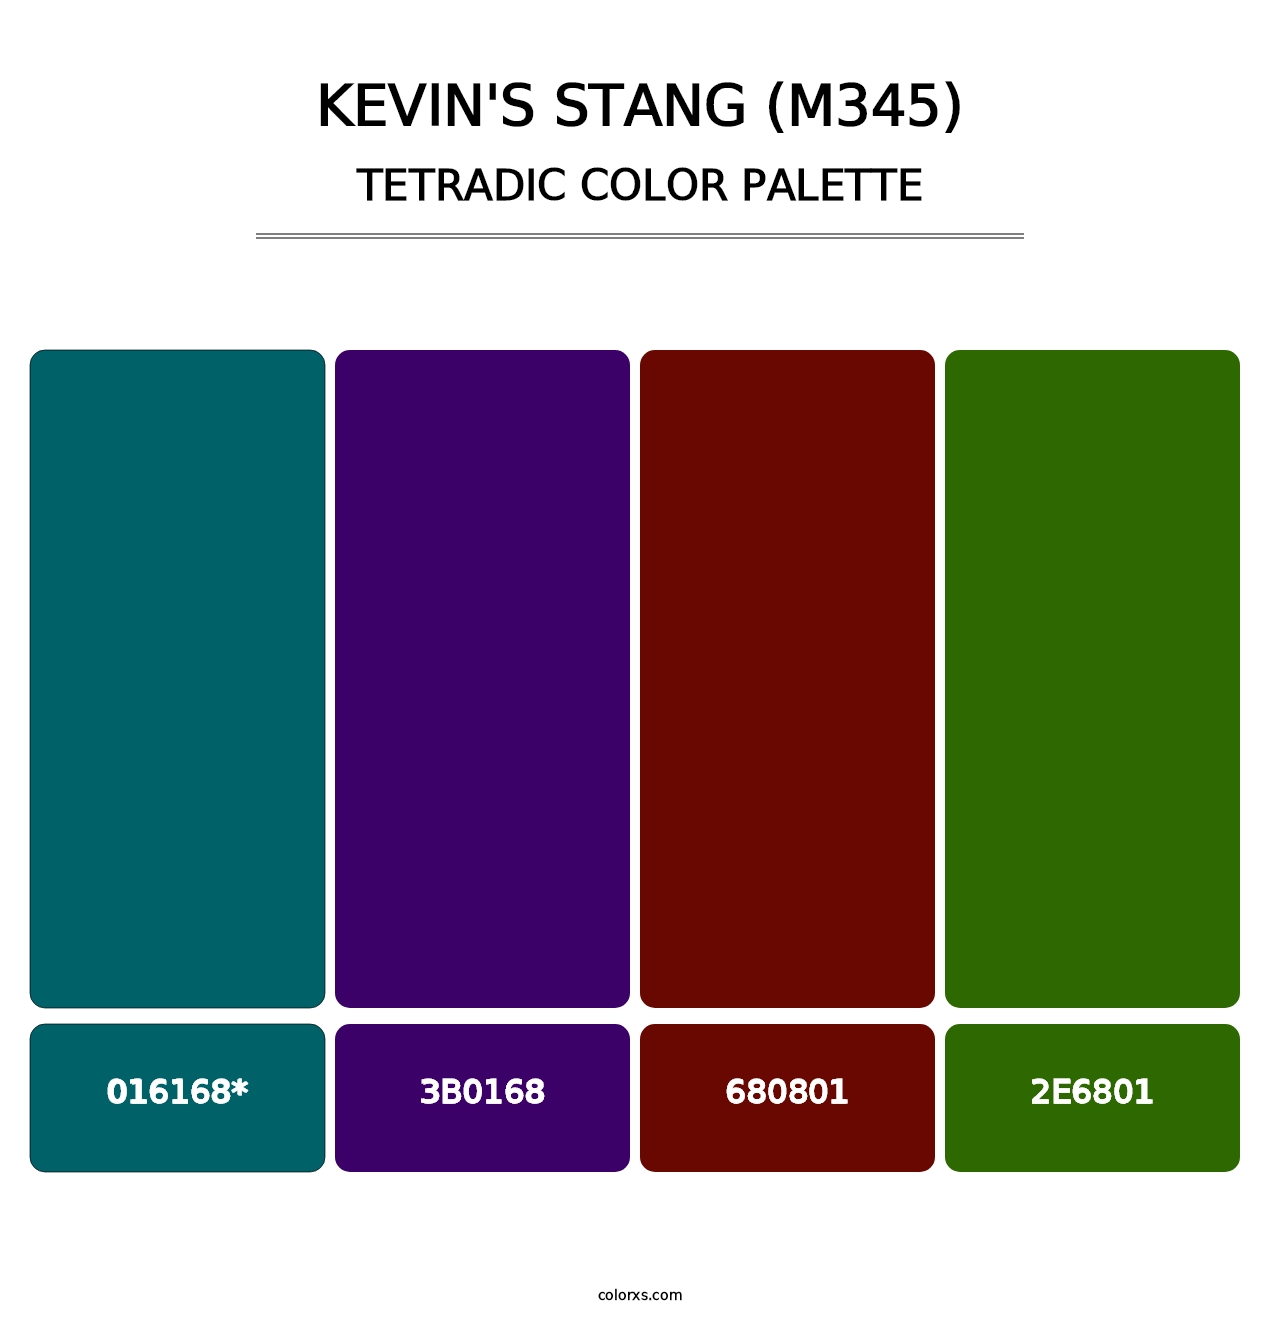 Kevin's Stang (M345) - Tetradic Color Palette